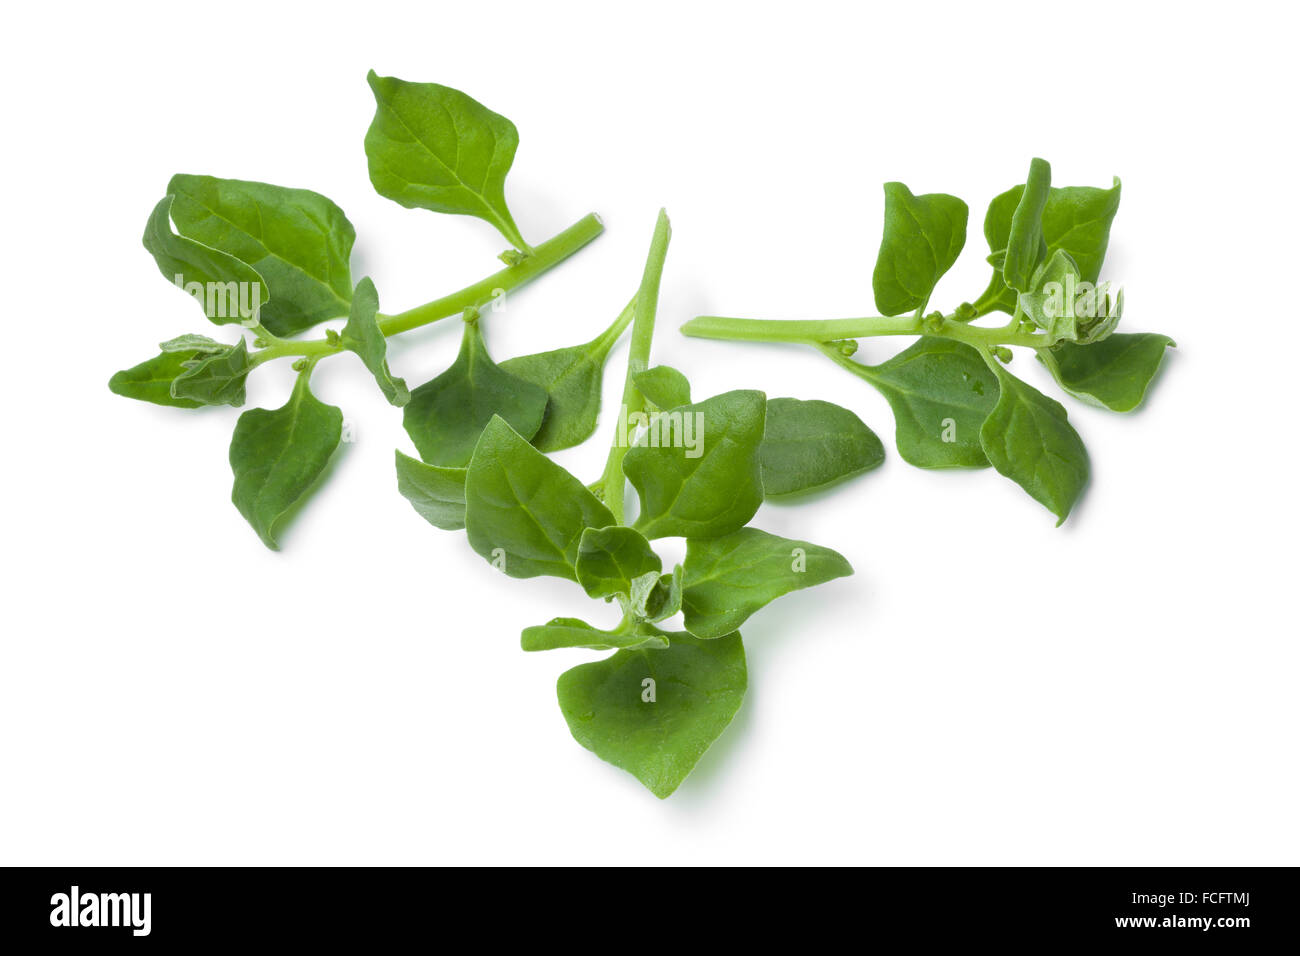 Fresh New Zealand spinach leaves on white background Stock Photo